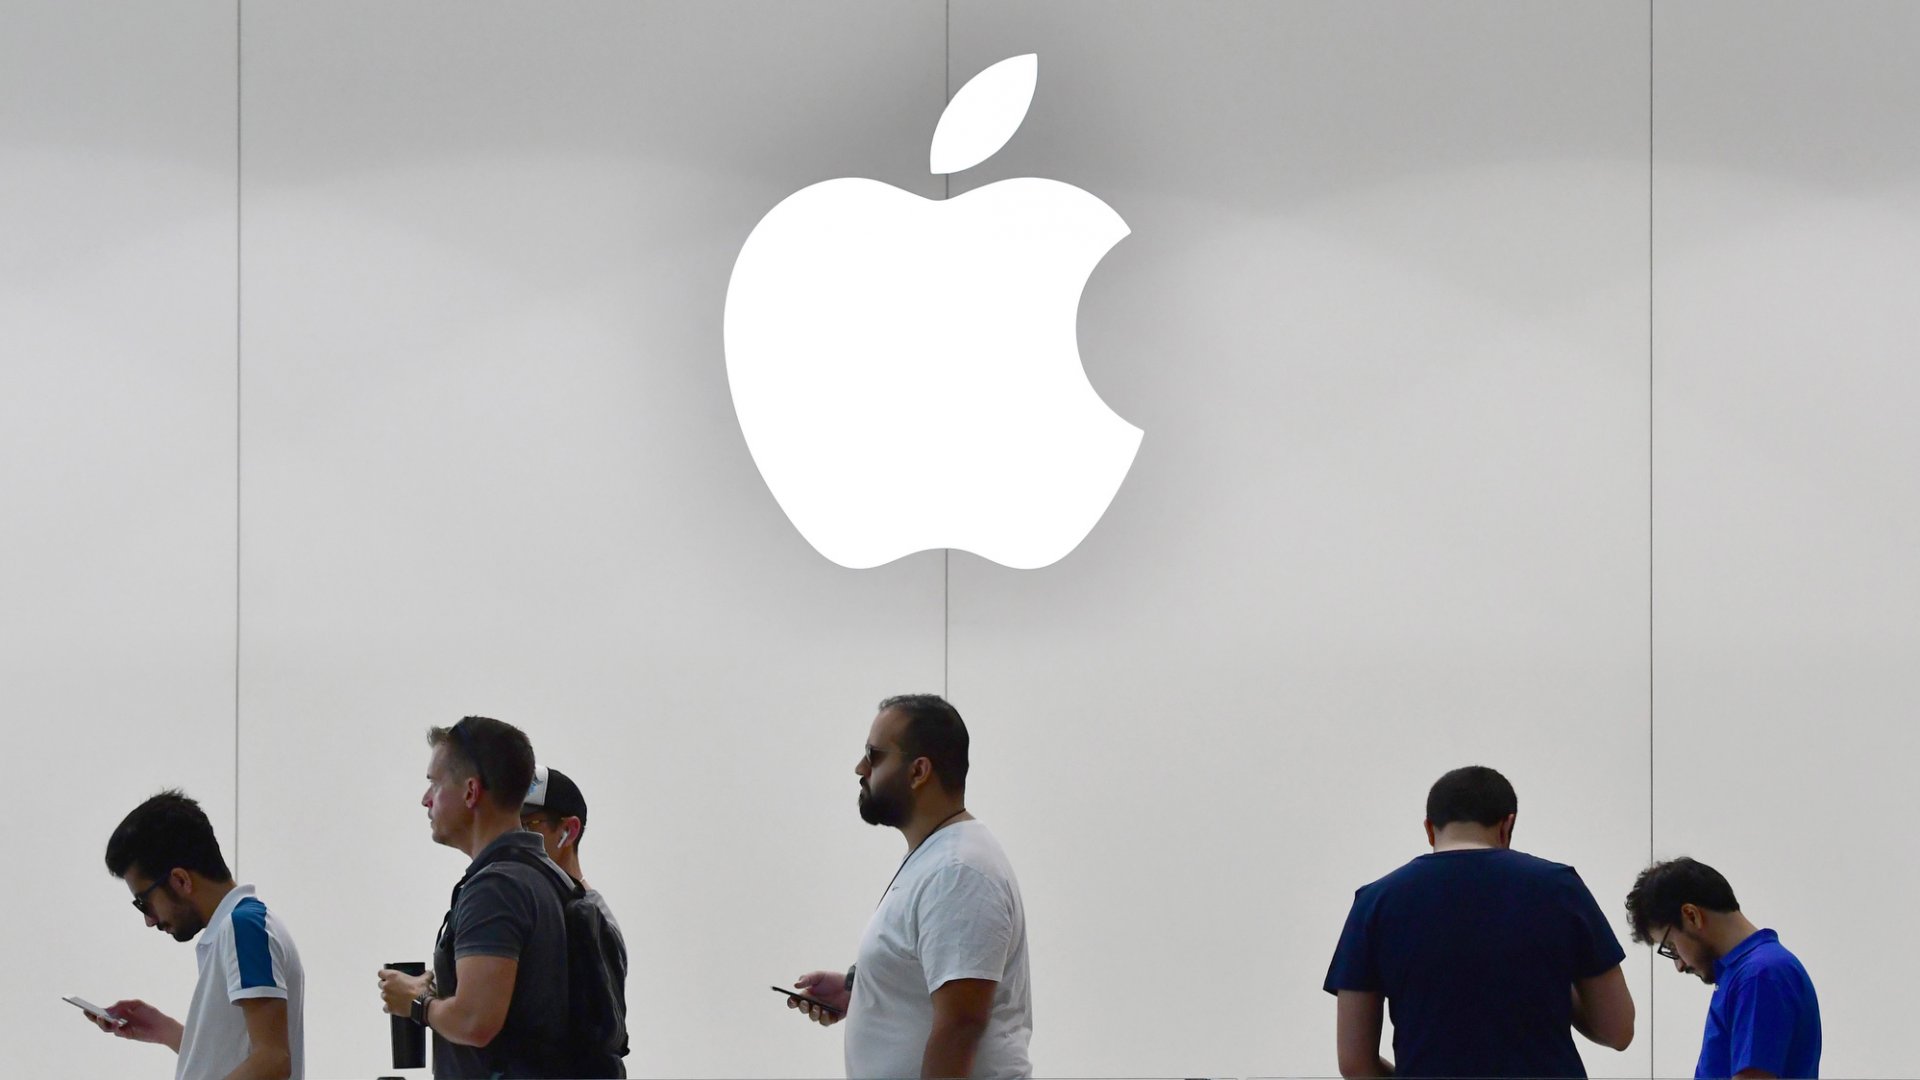 Apple is in a position to provide digital currency services